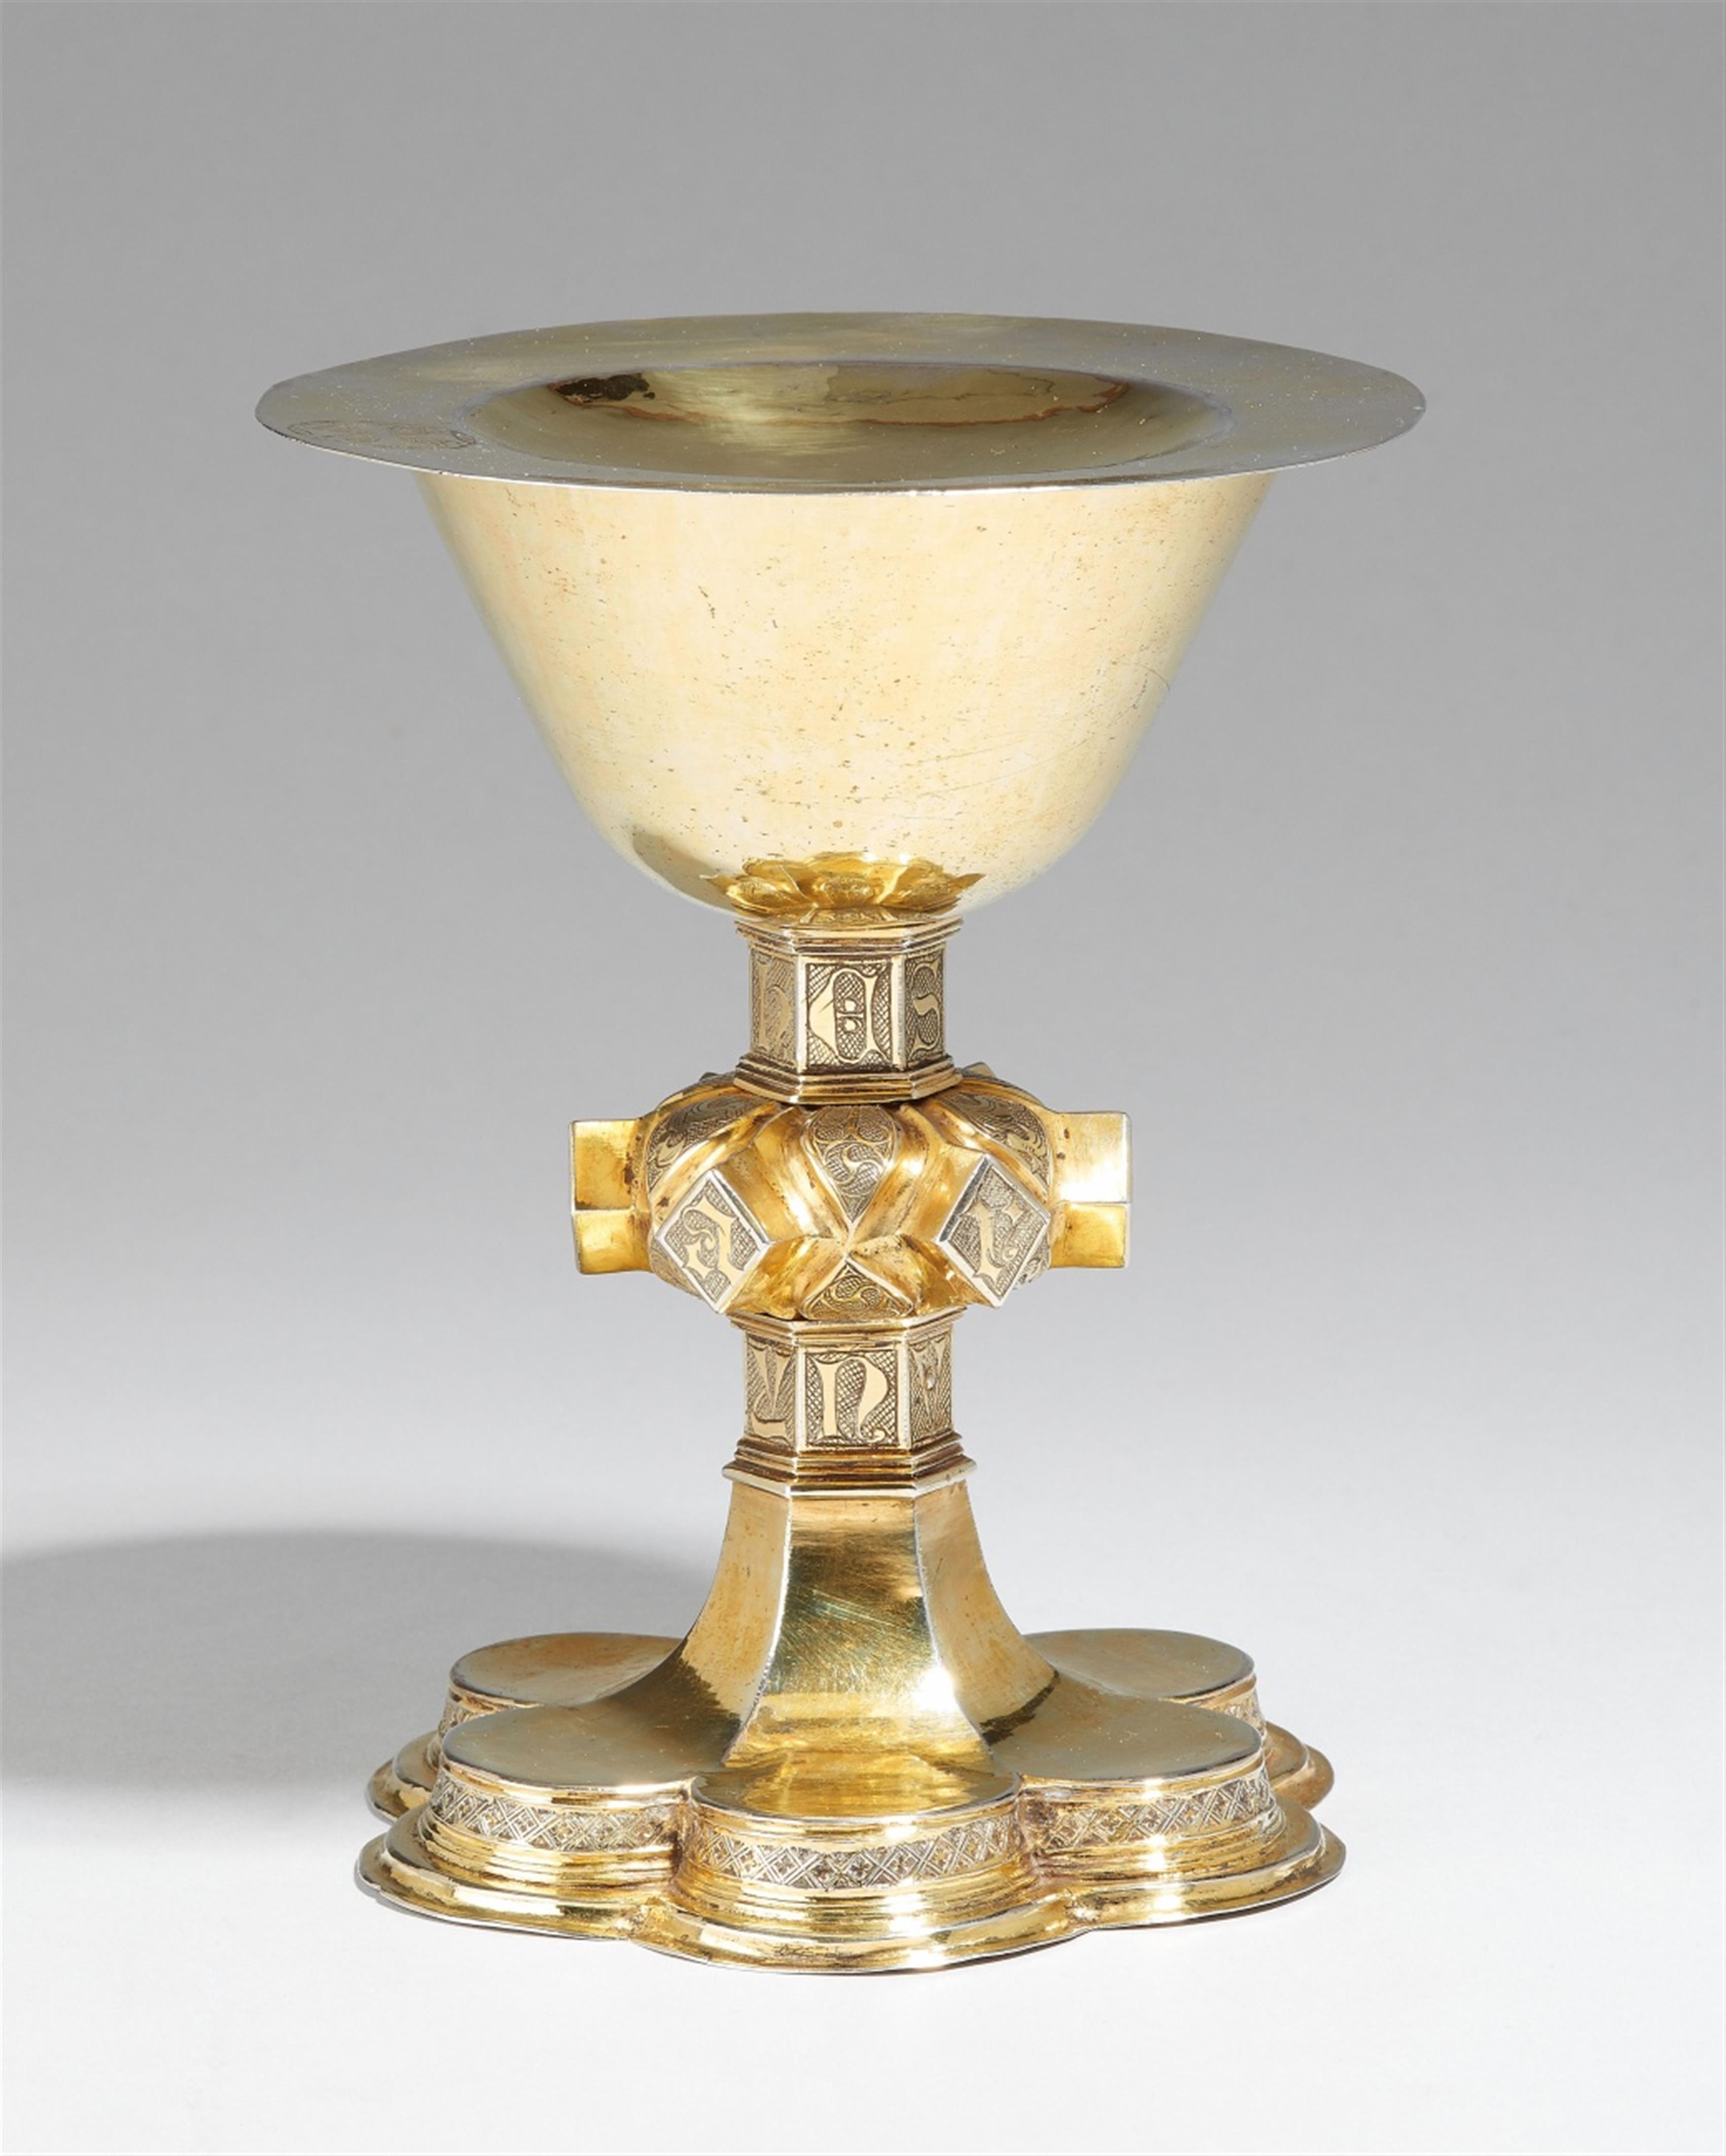 A late gothic German silver gilt chalice and patene. Engraved "IHESVS NACARE ZEYNVS" to the shaft and the weight annotation "Wigt 25 lott" to the underside. Unmarked, ca. 1500. - image-1